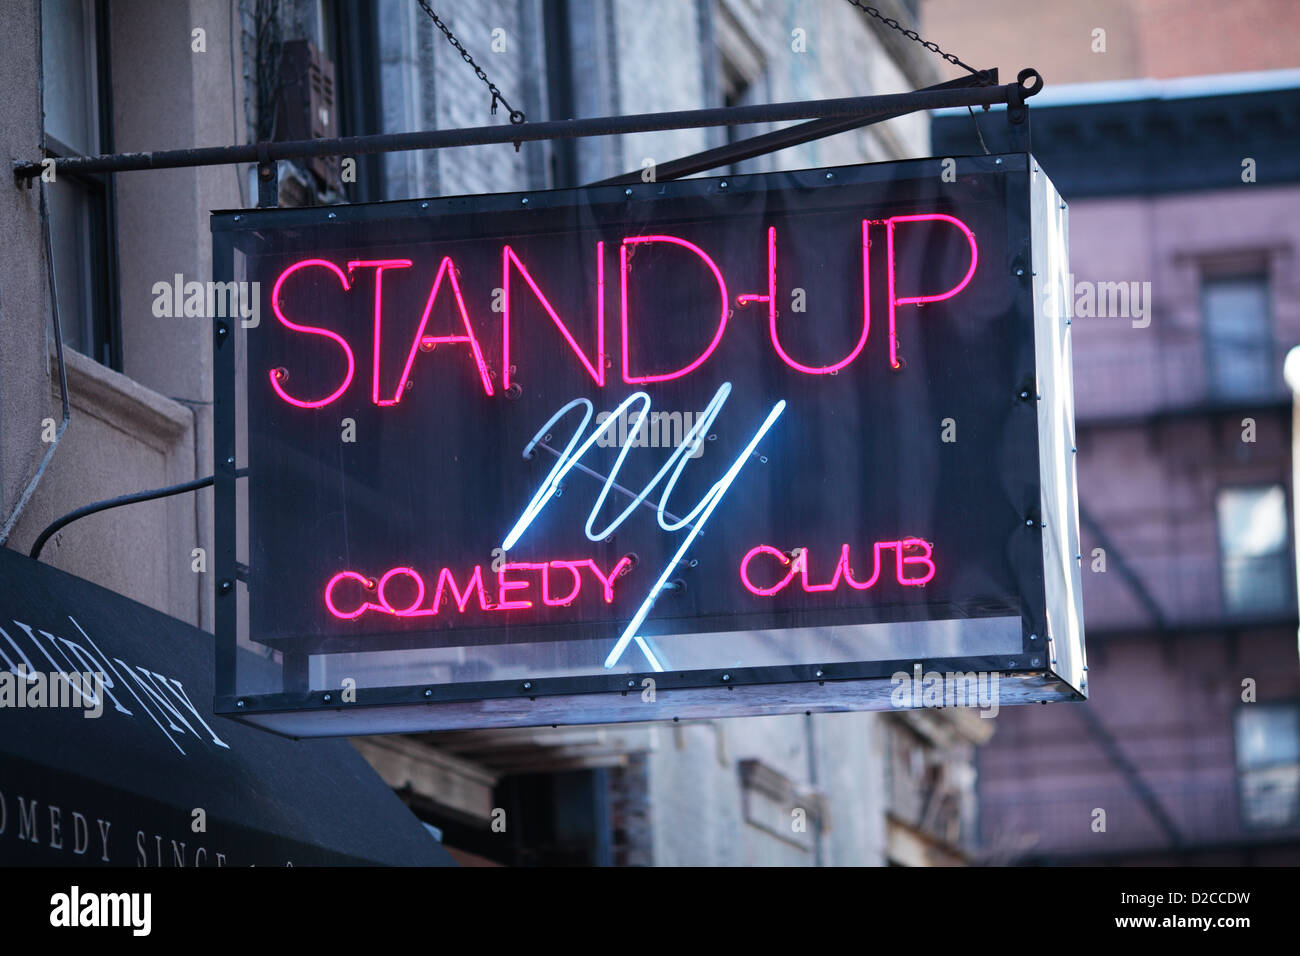 Stand-up Comedy Club neon sign in New York. Stock Photo